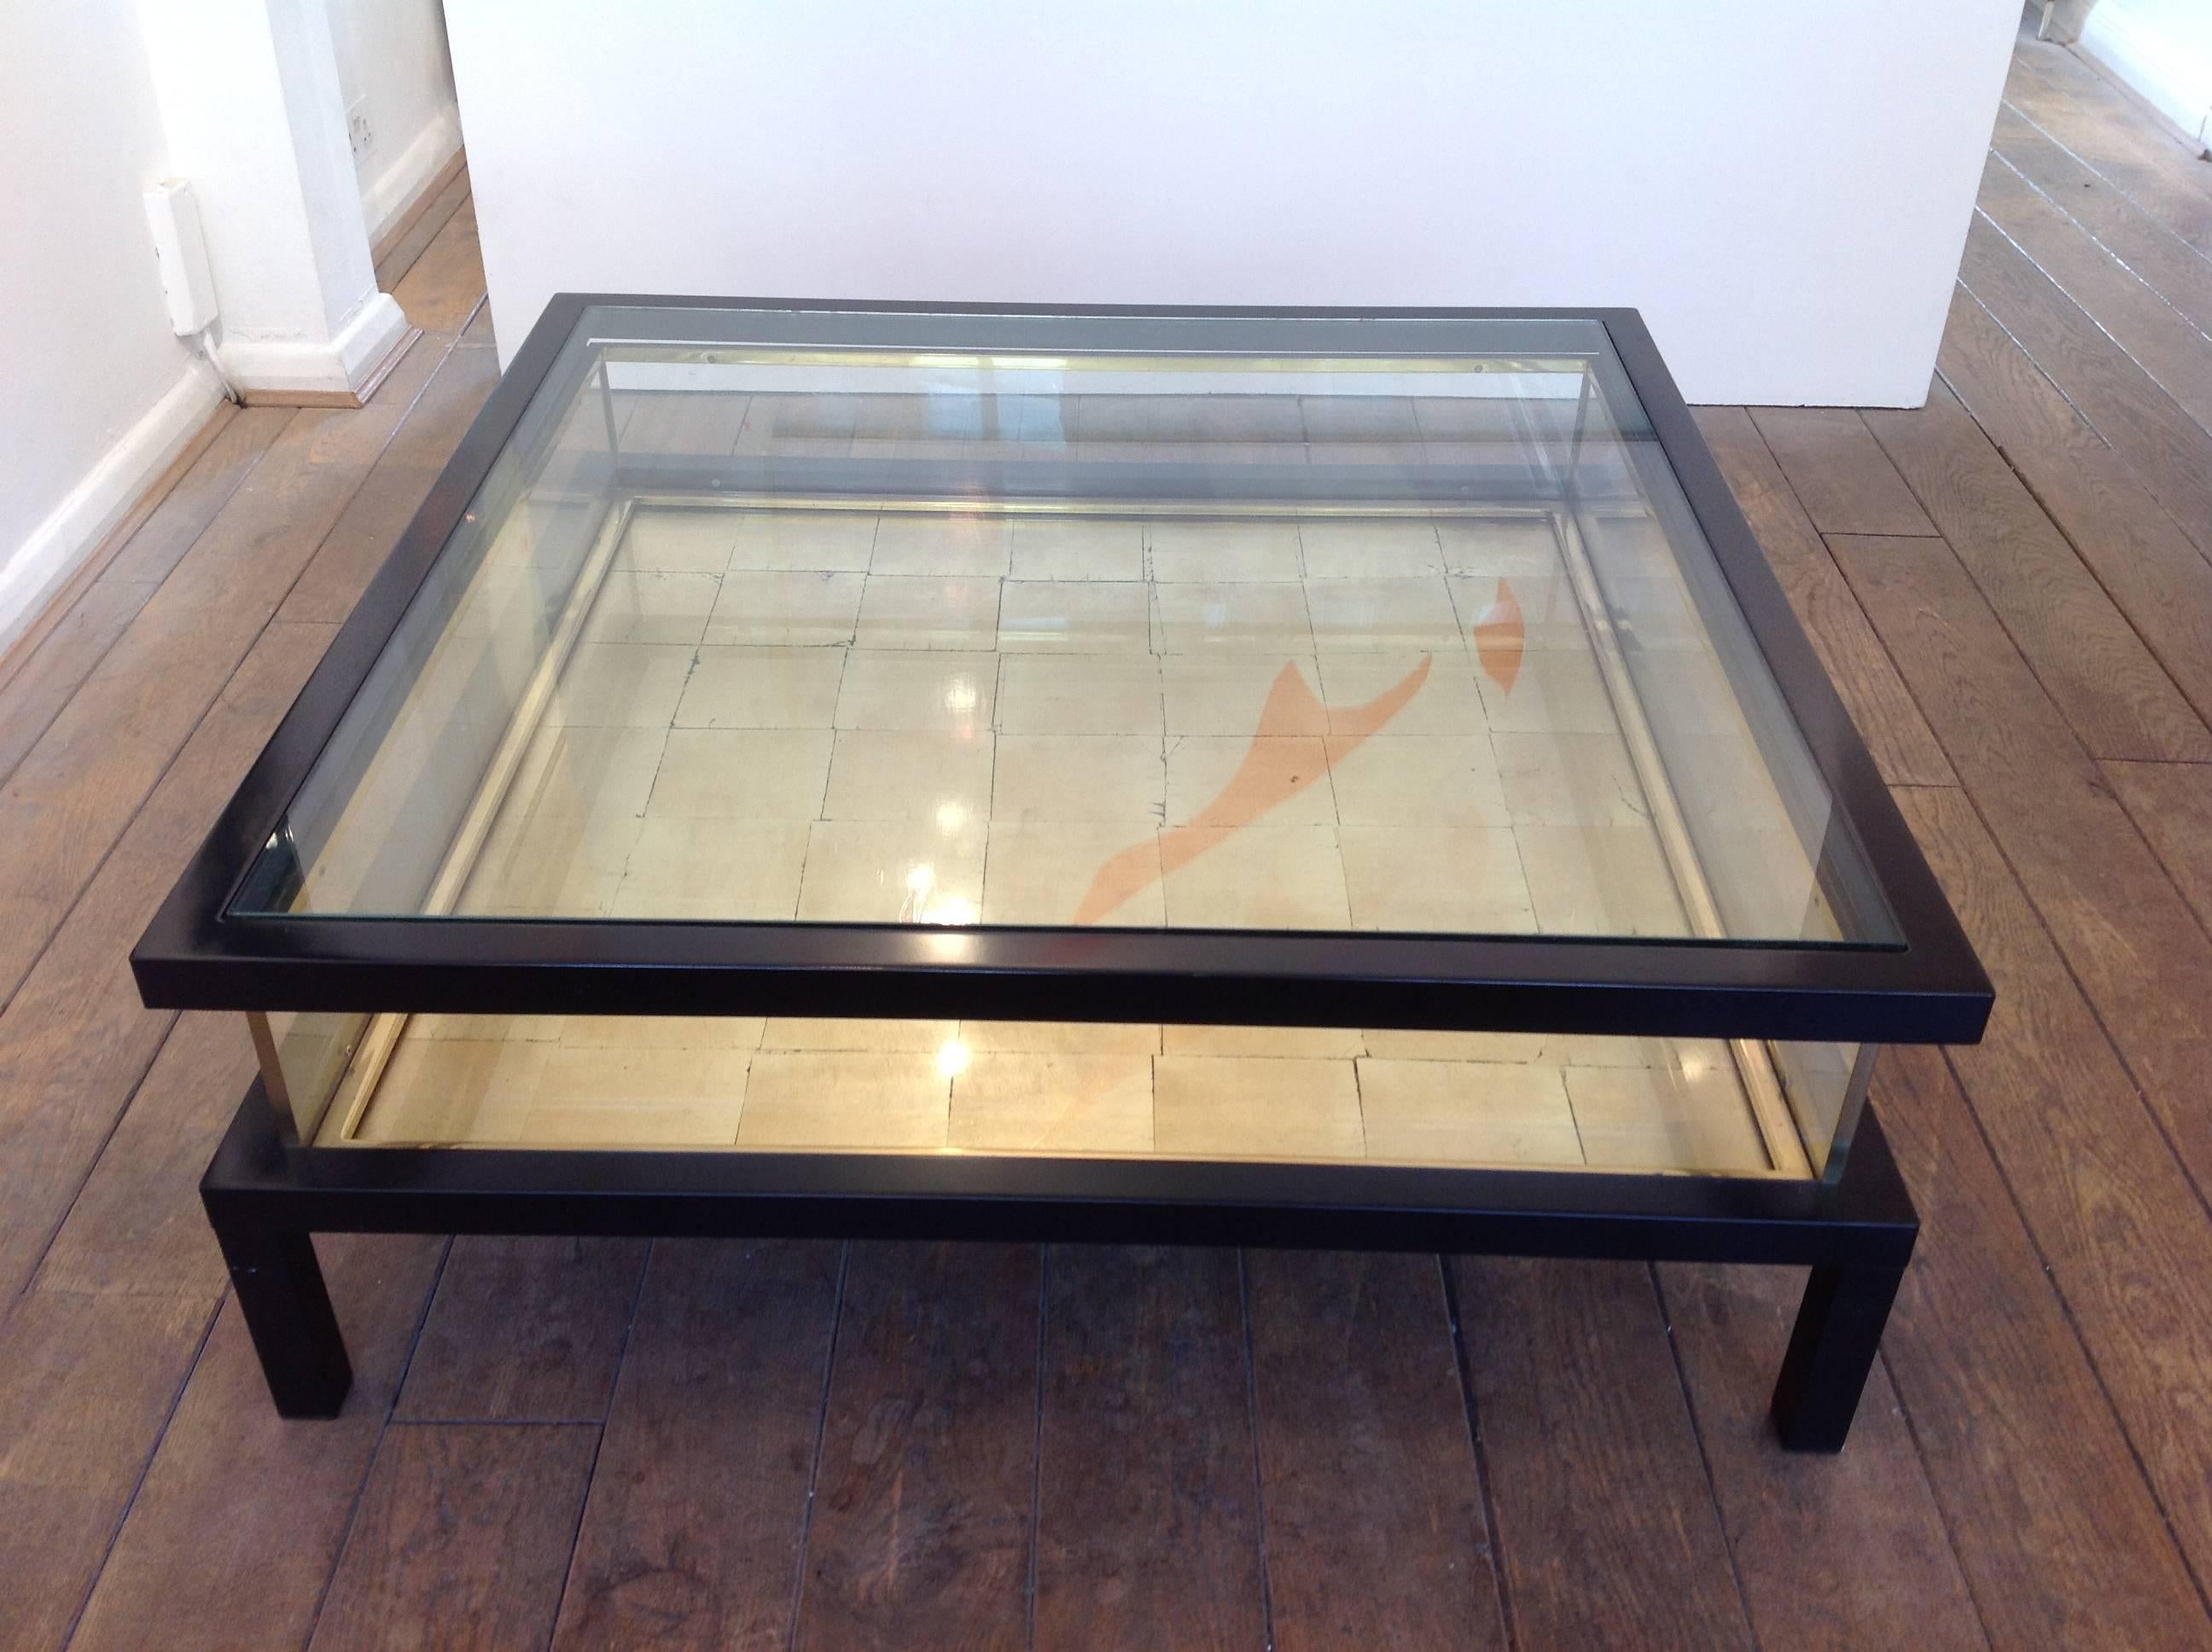 A unique version of the Maison Jansen sliding coffee table with black lacquer frame and brass trims. The top slides back on runners to reveal the inside, which has real gold leaf sheets laid under the glass base.